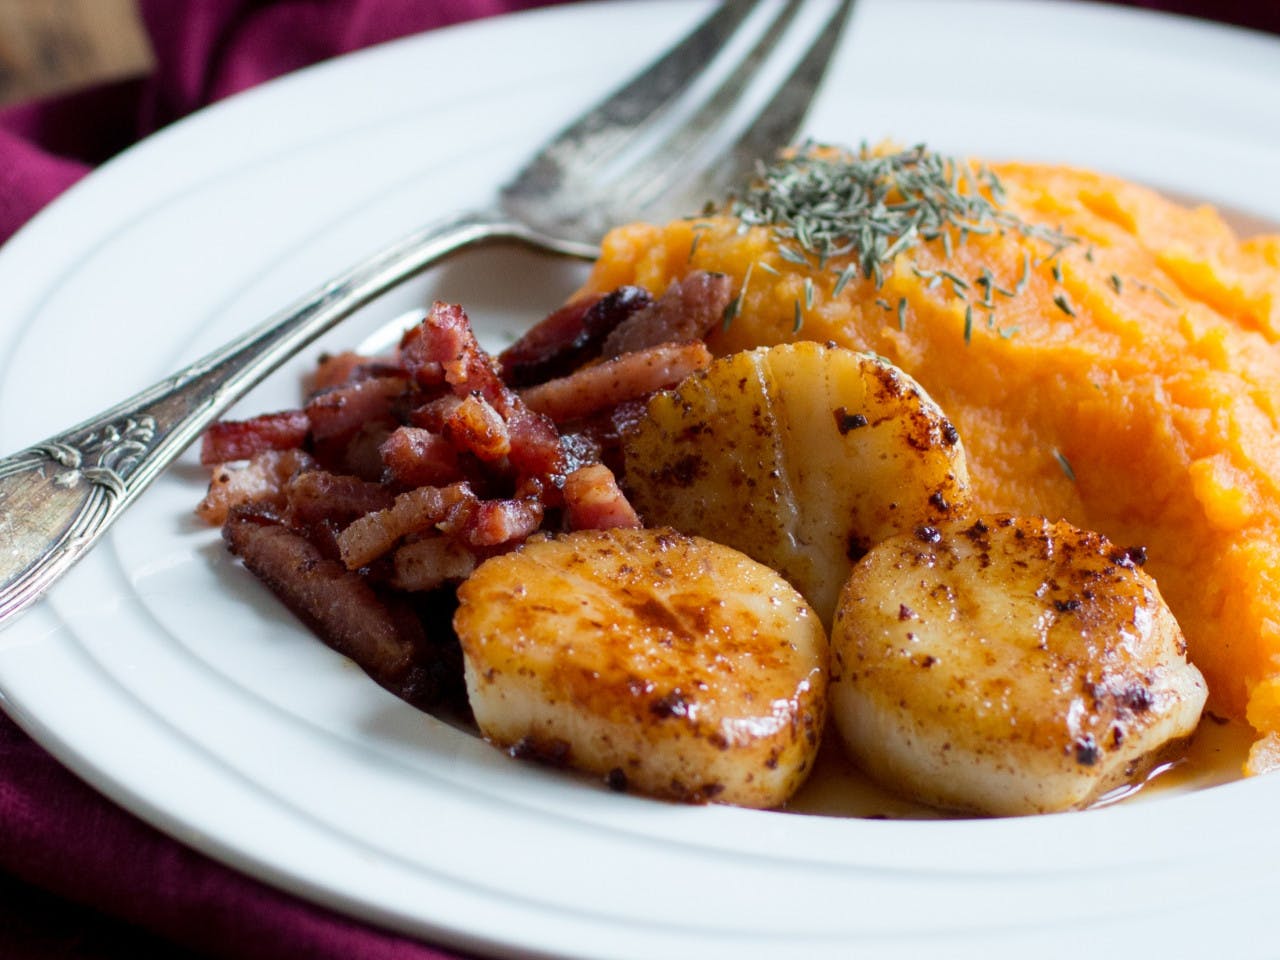 Scallops with carrot puree